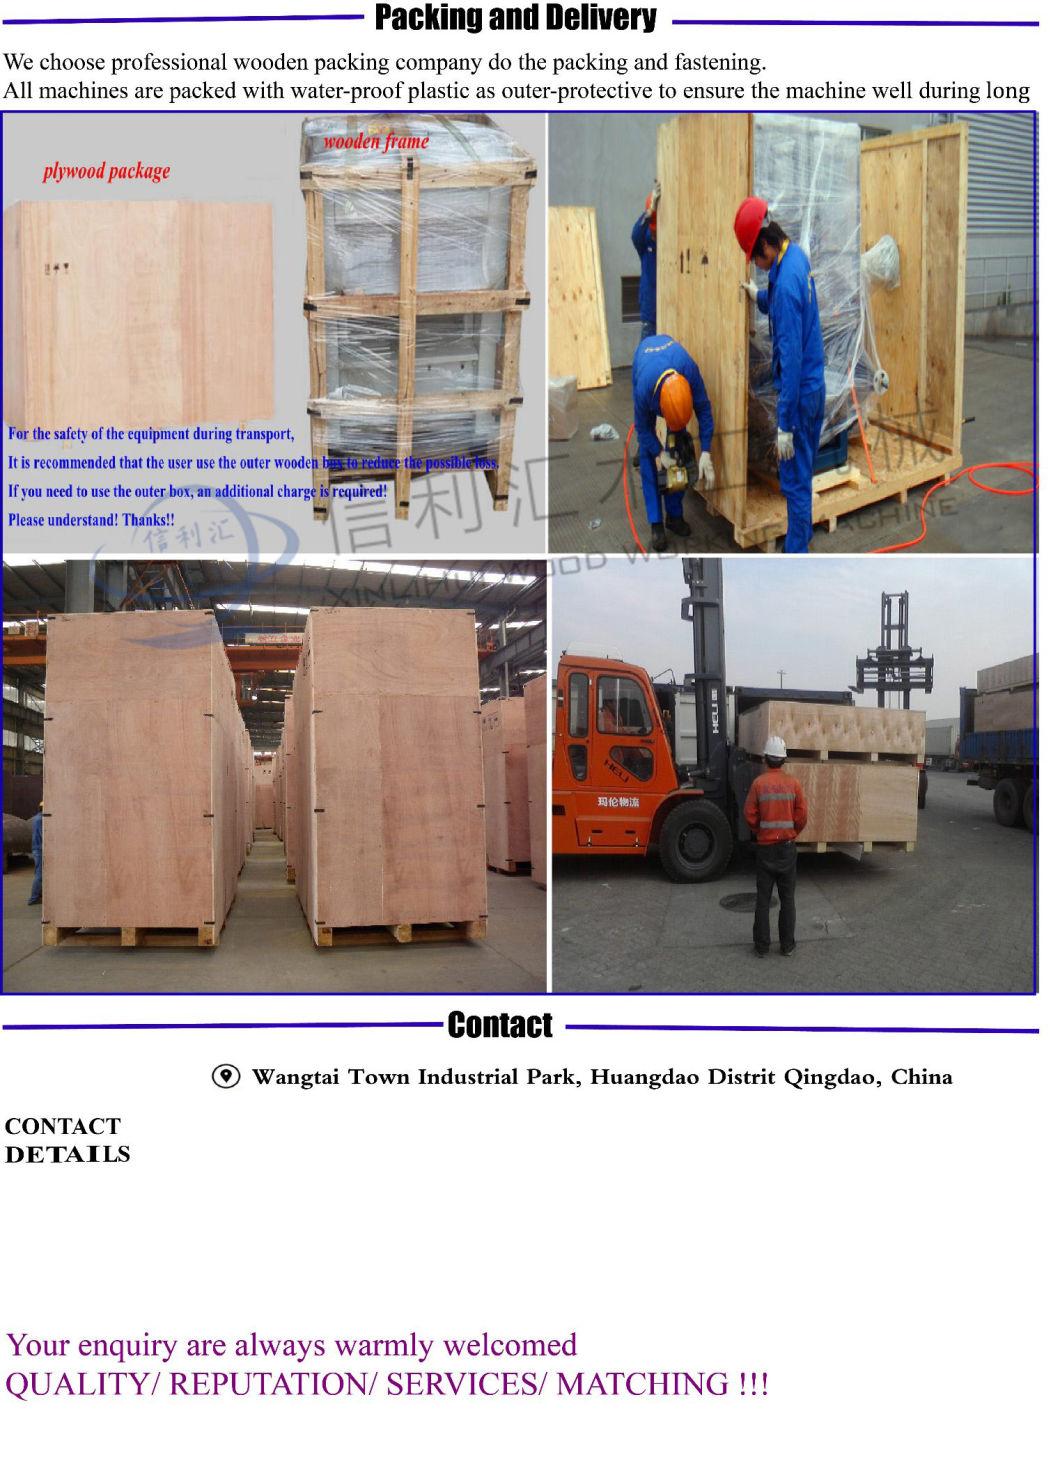 Hydraulic Two Sides Wood Clamp Carrier with Heating System/ Woodworking Combination Machine Clamp Carrier